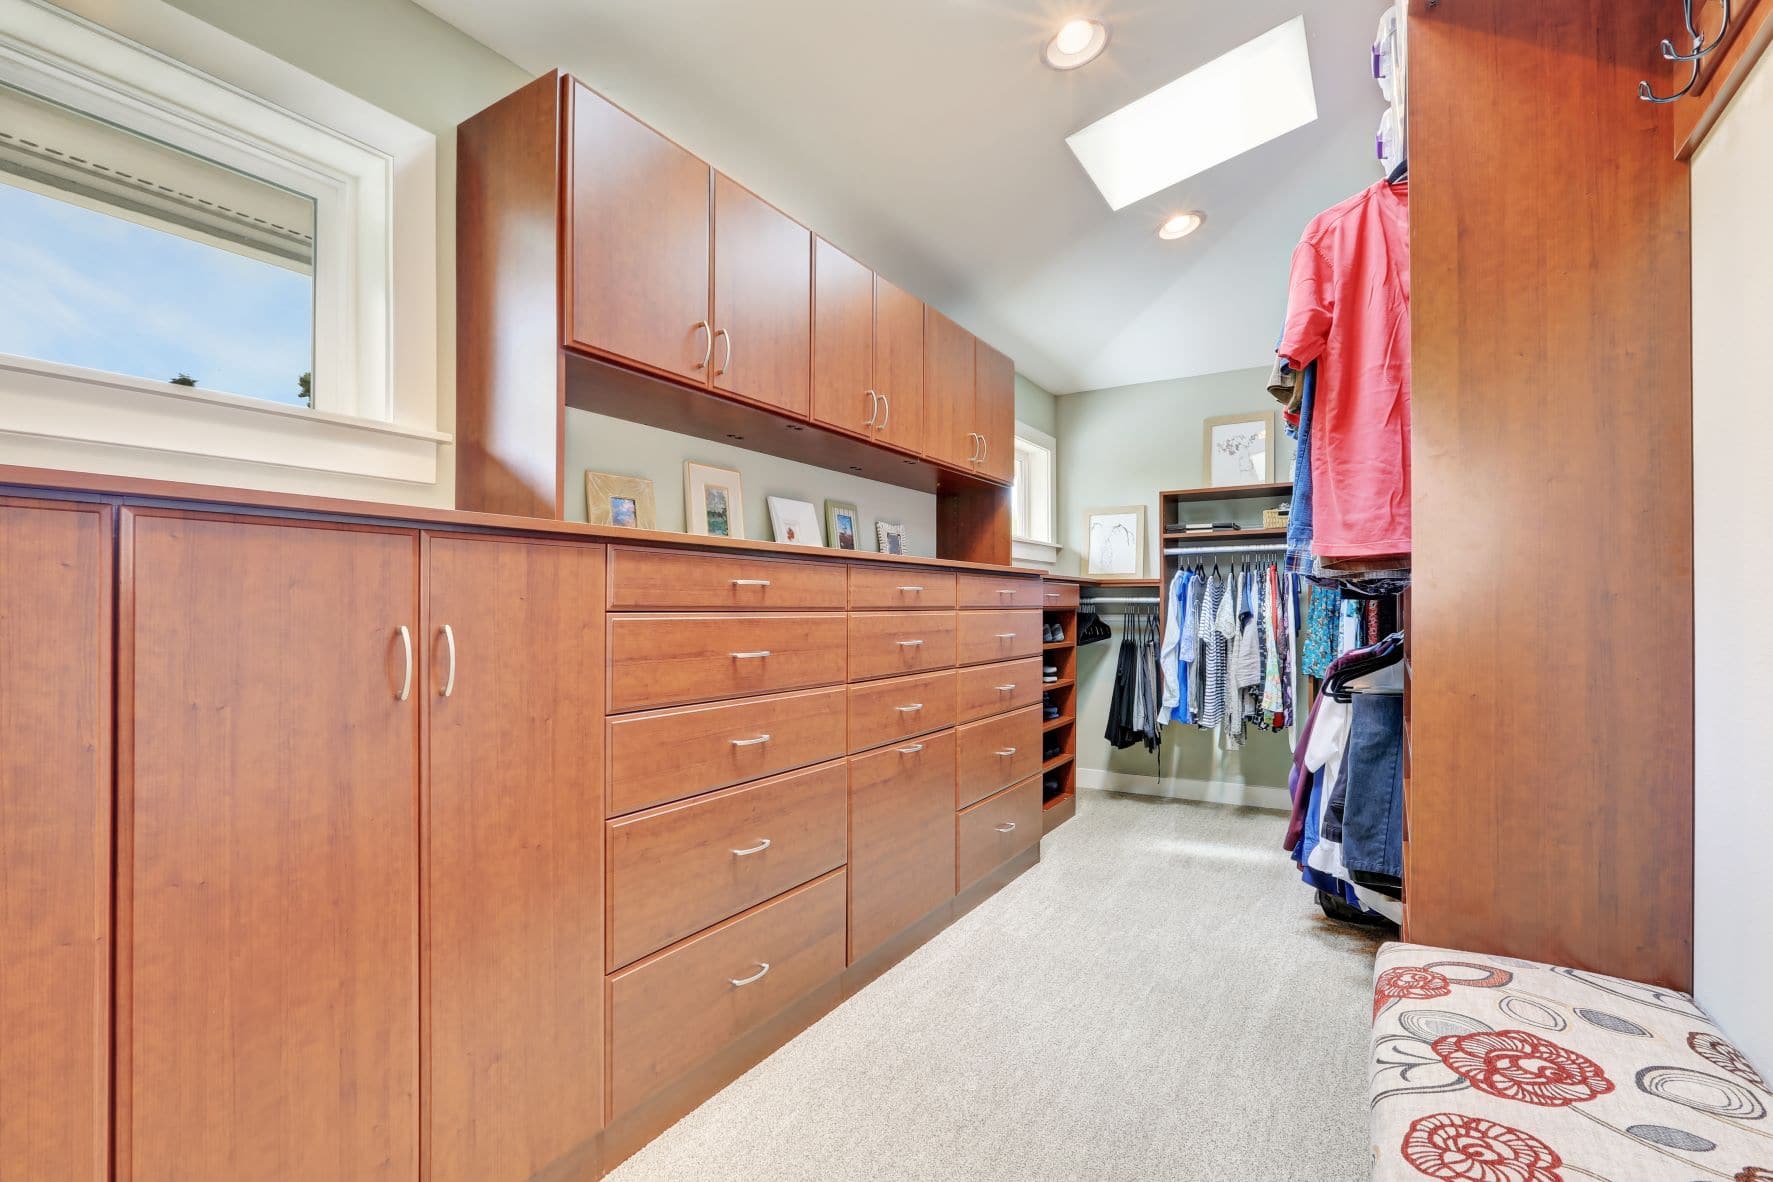 A large walk-in closet with medium-colored wood and a seating area